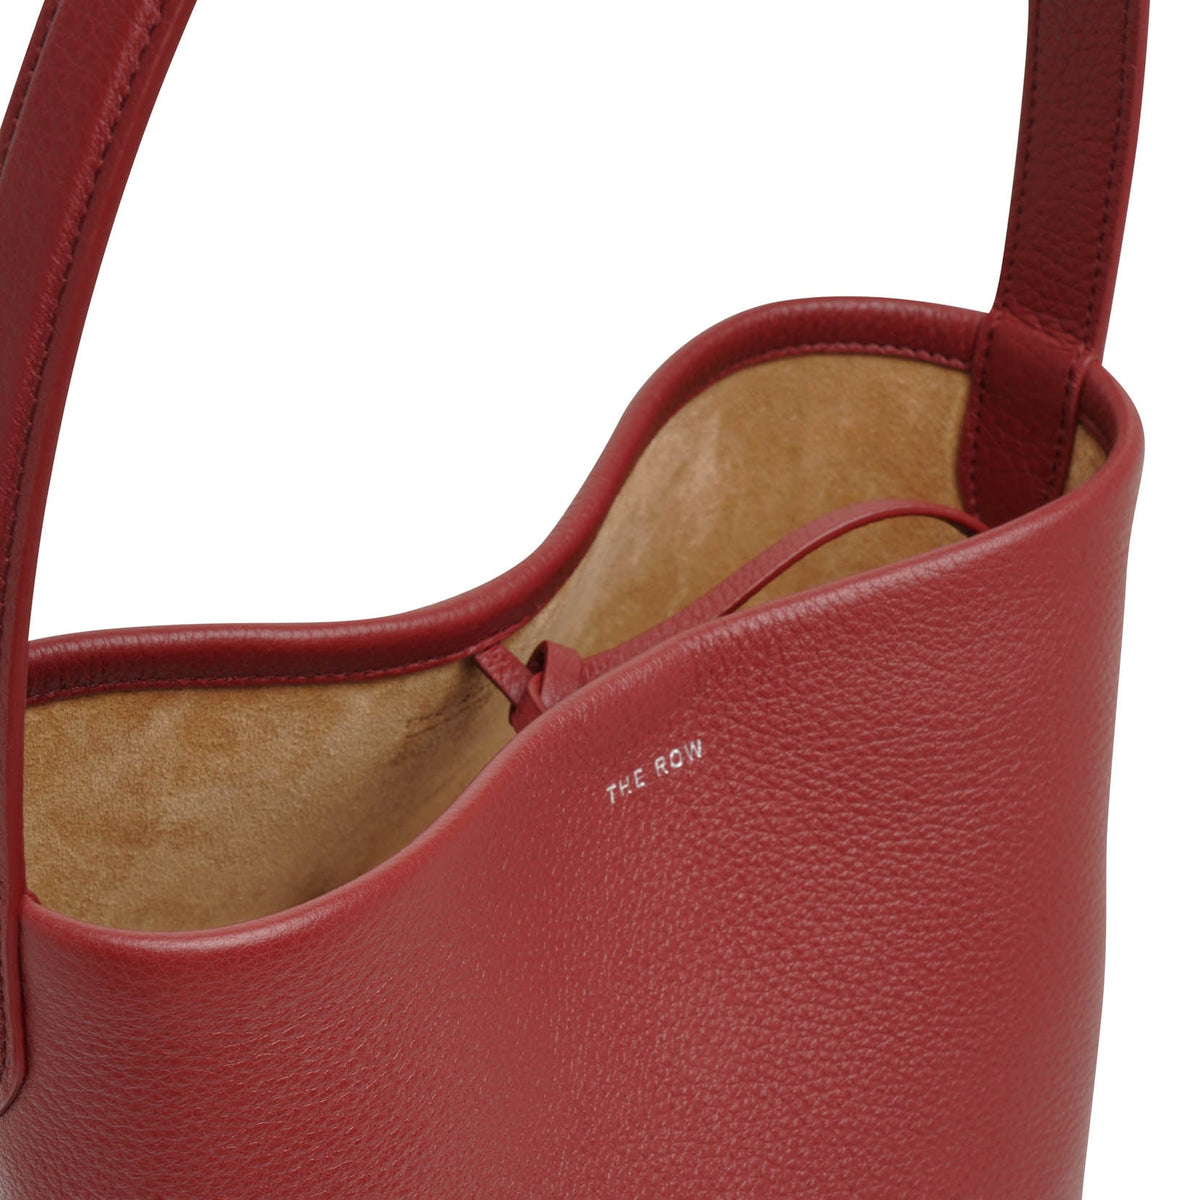 THE ROW Park Small North-South Tote Bag in Suede